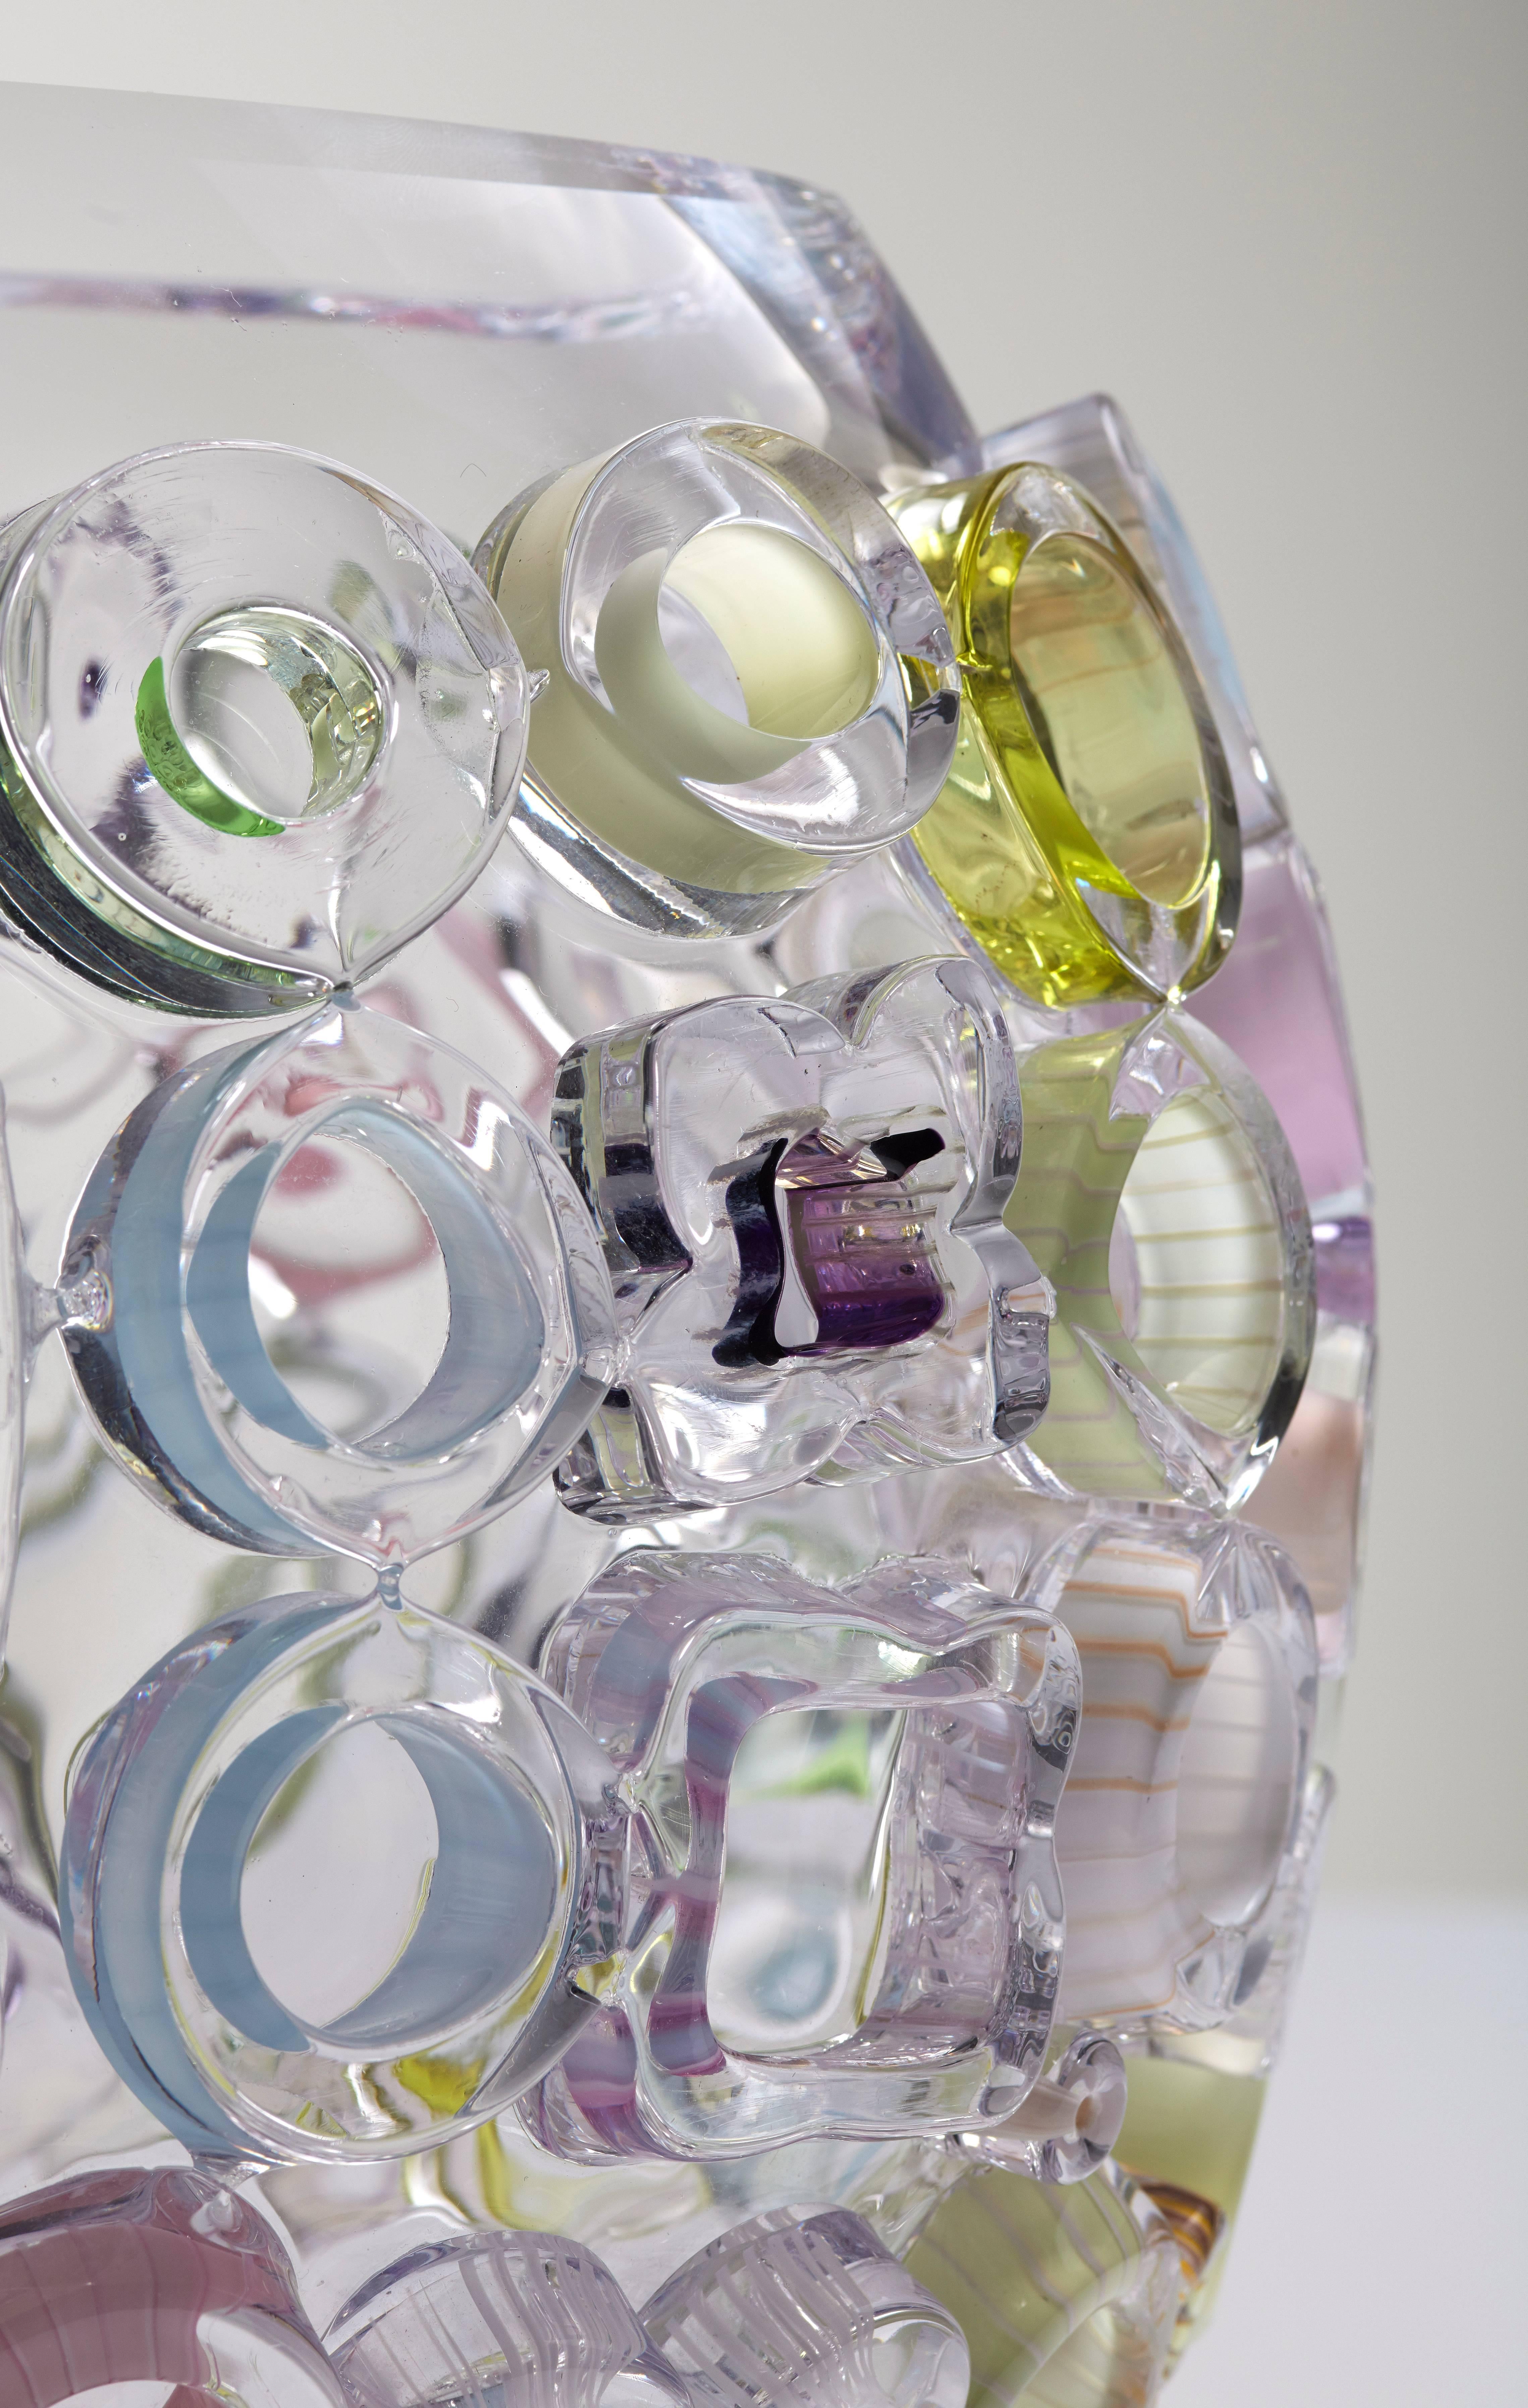 Blown glass bowl shaped Sculpture. Translucent blown glass with glass ornaments melted to the body. The ornaments on the outside of the glass bowl contain subtle color applications in pastels like: pink, green, yellow, blue and purple.
Each